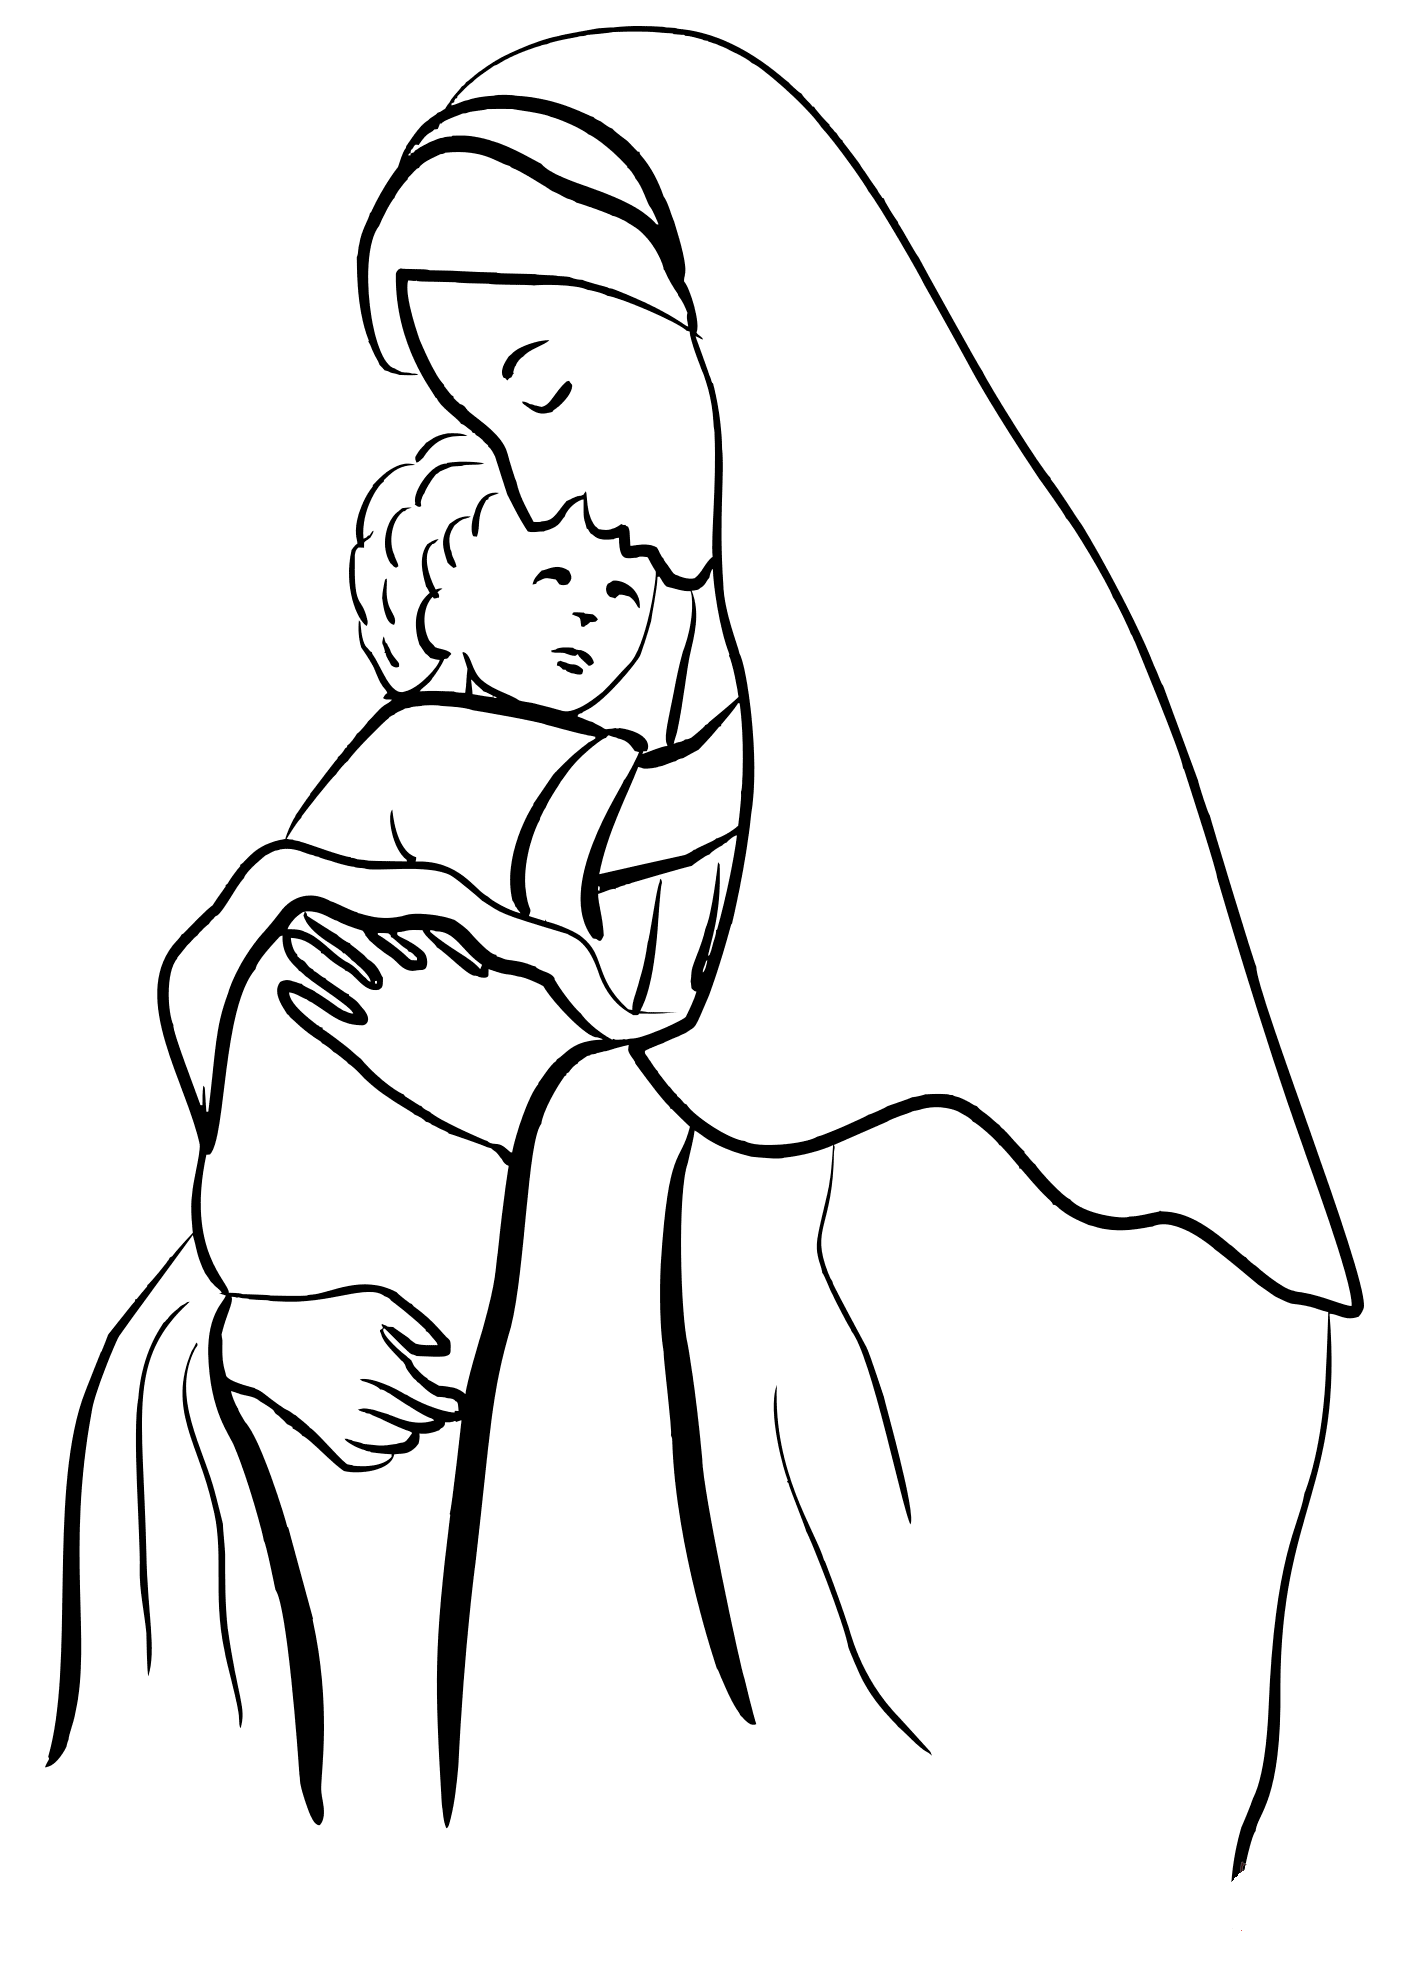 Baby Jesus Coloring Page For Kids Coloring Page